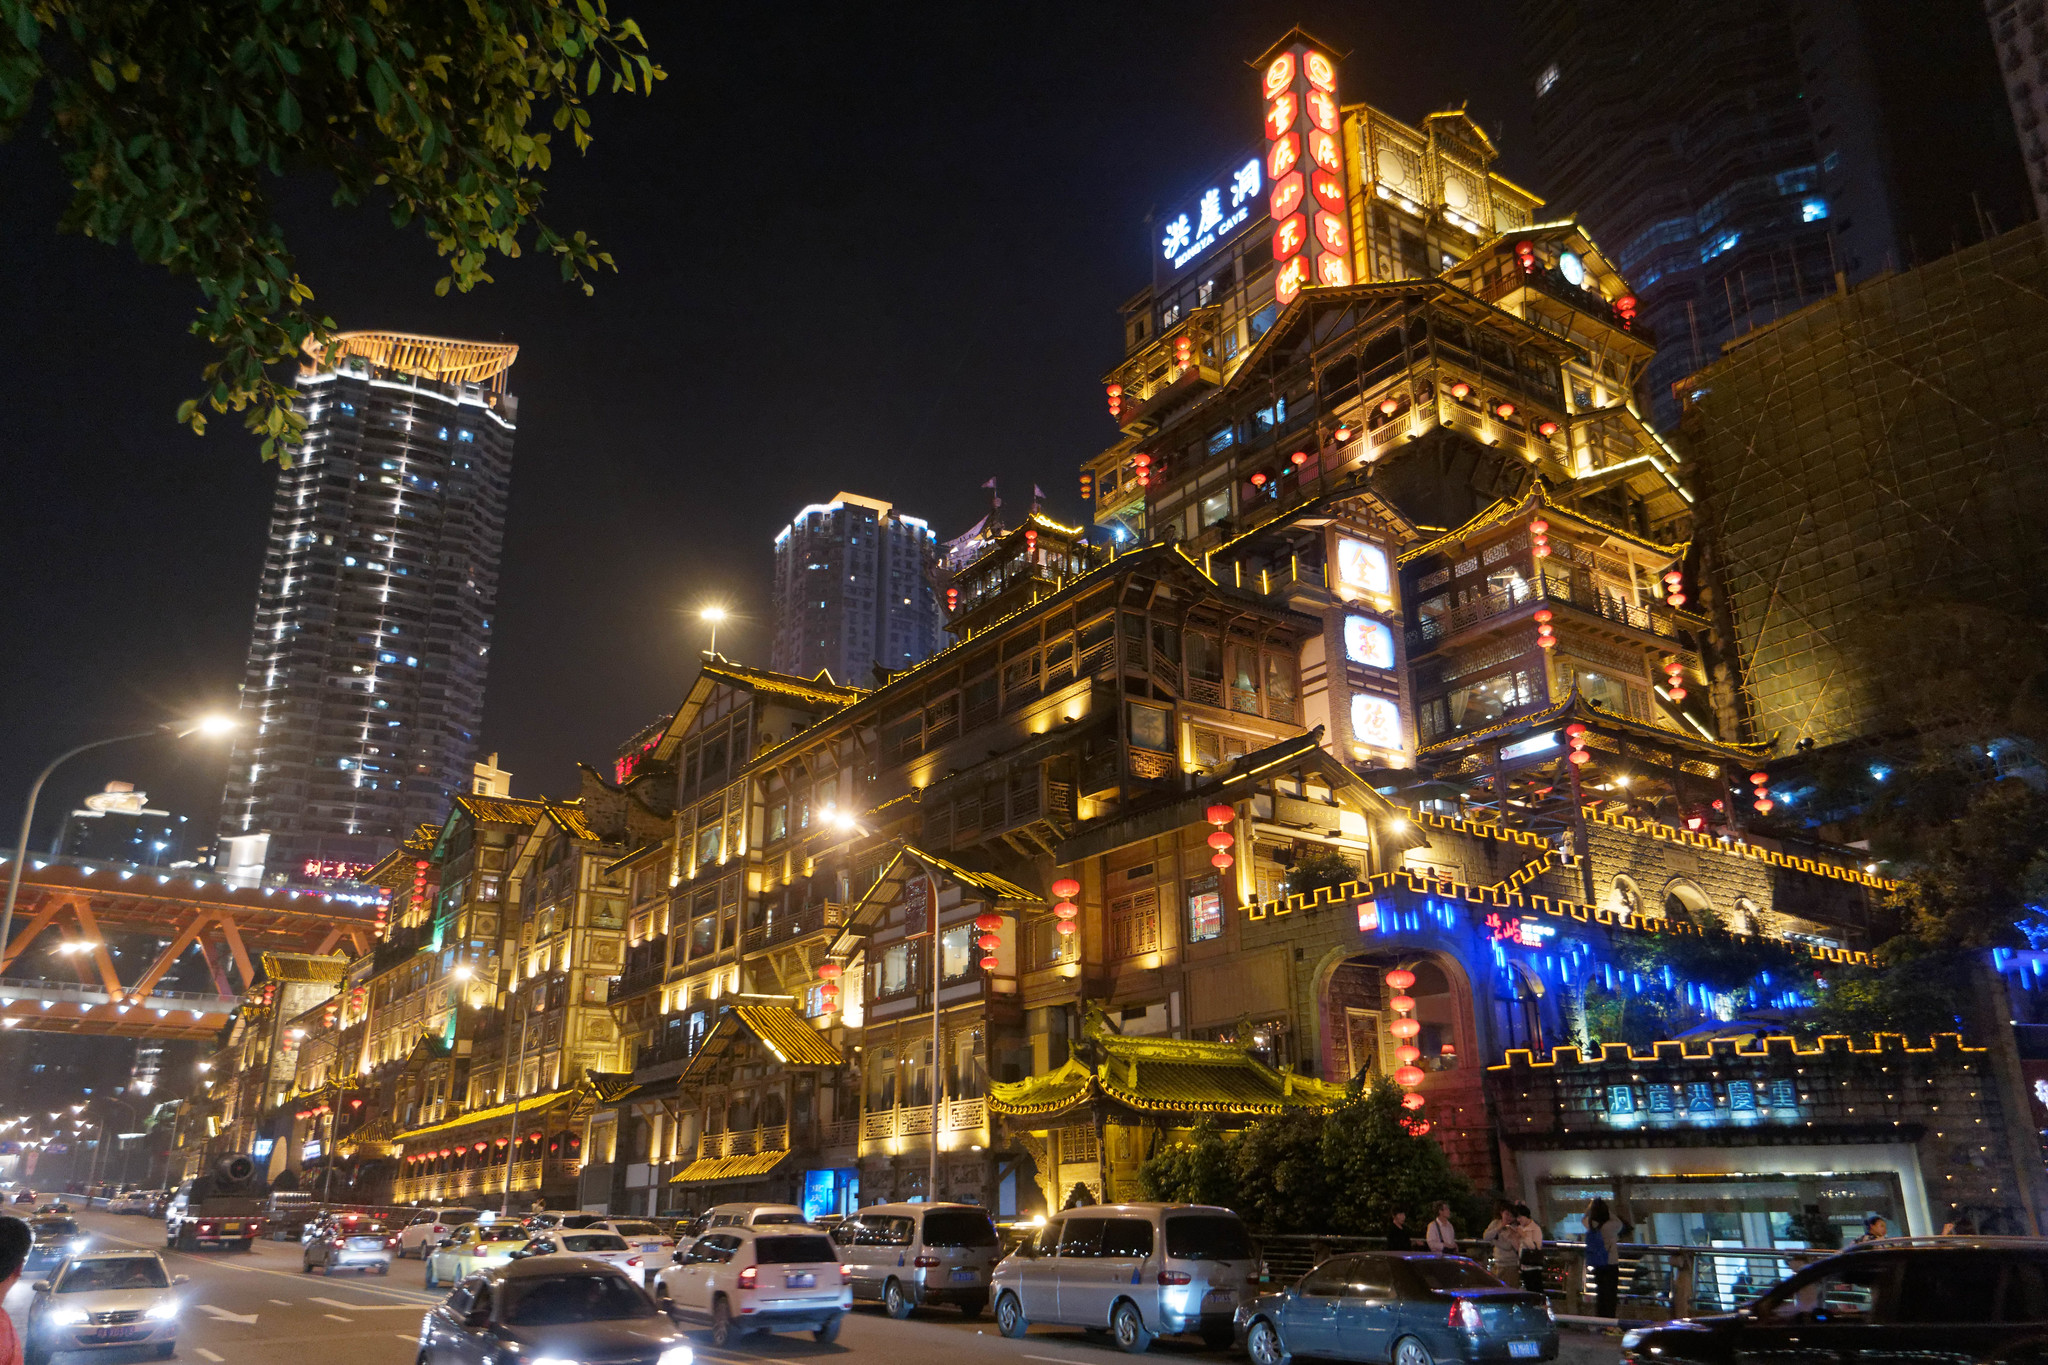 5 Best Things To Do in Chongqing, China [with Suggested Tours]